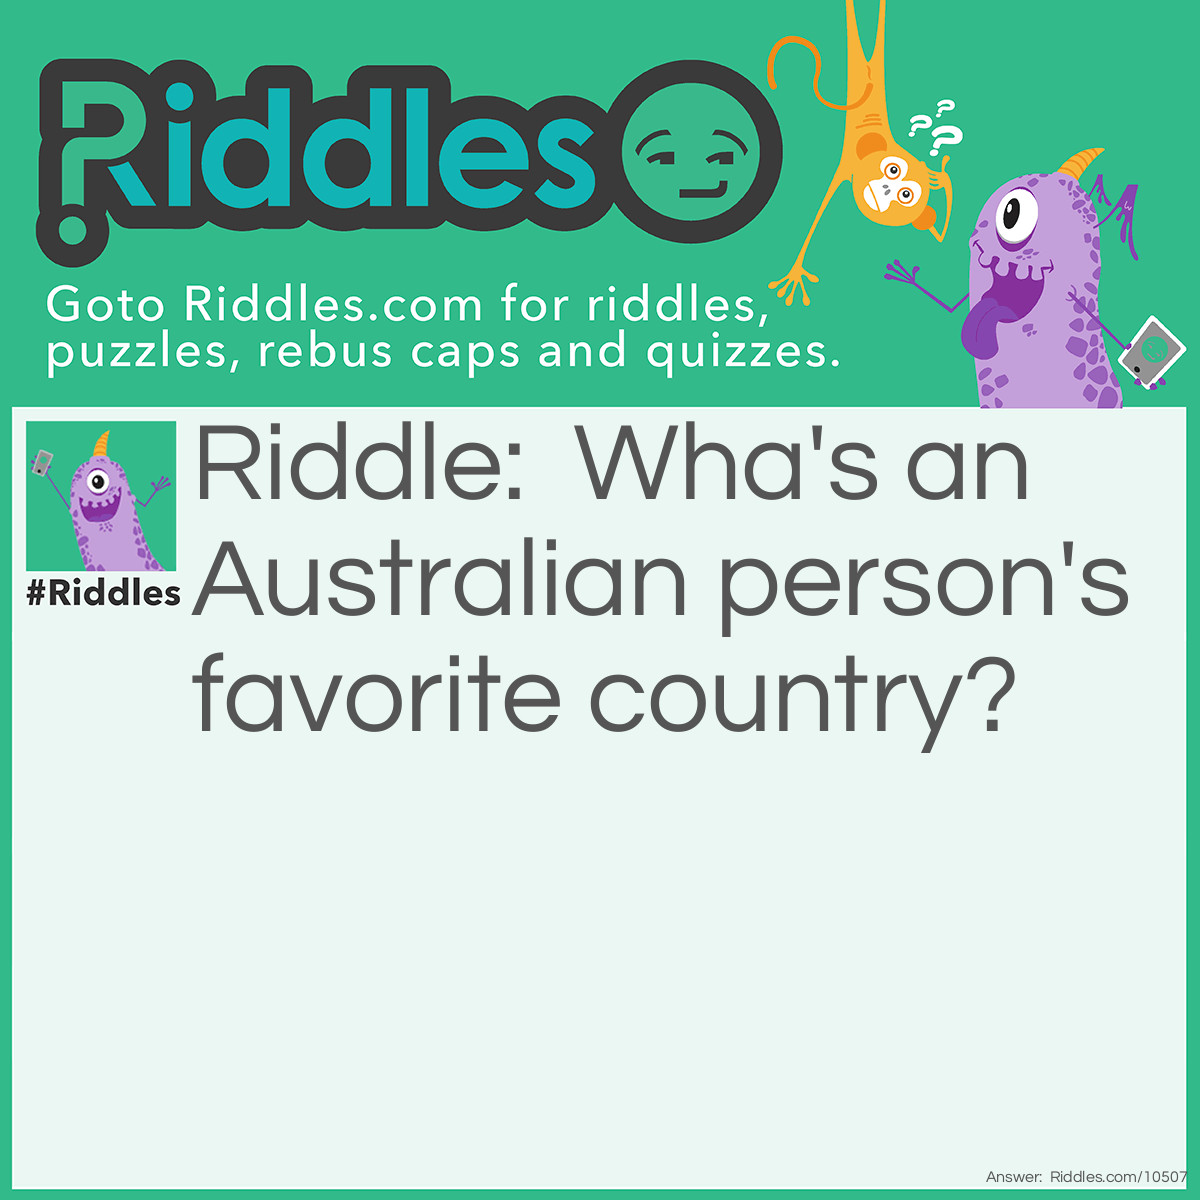 Riddle: Wha's an Australian person's favorite country? Answer: Naur way!